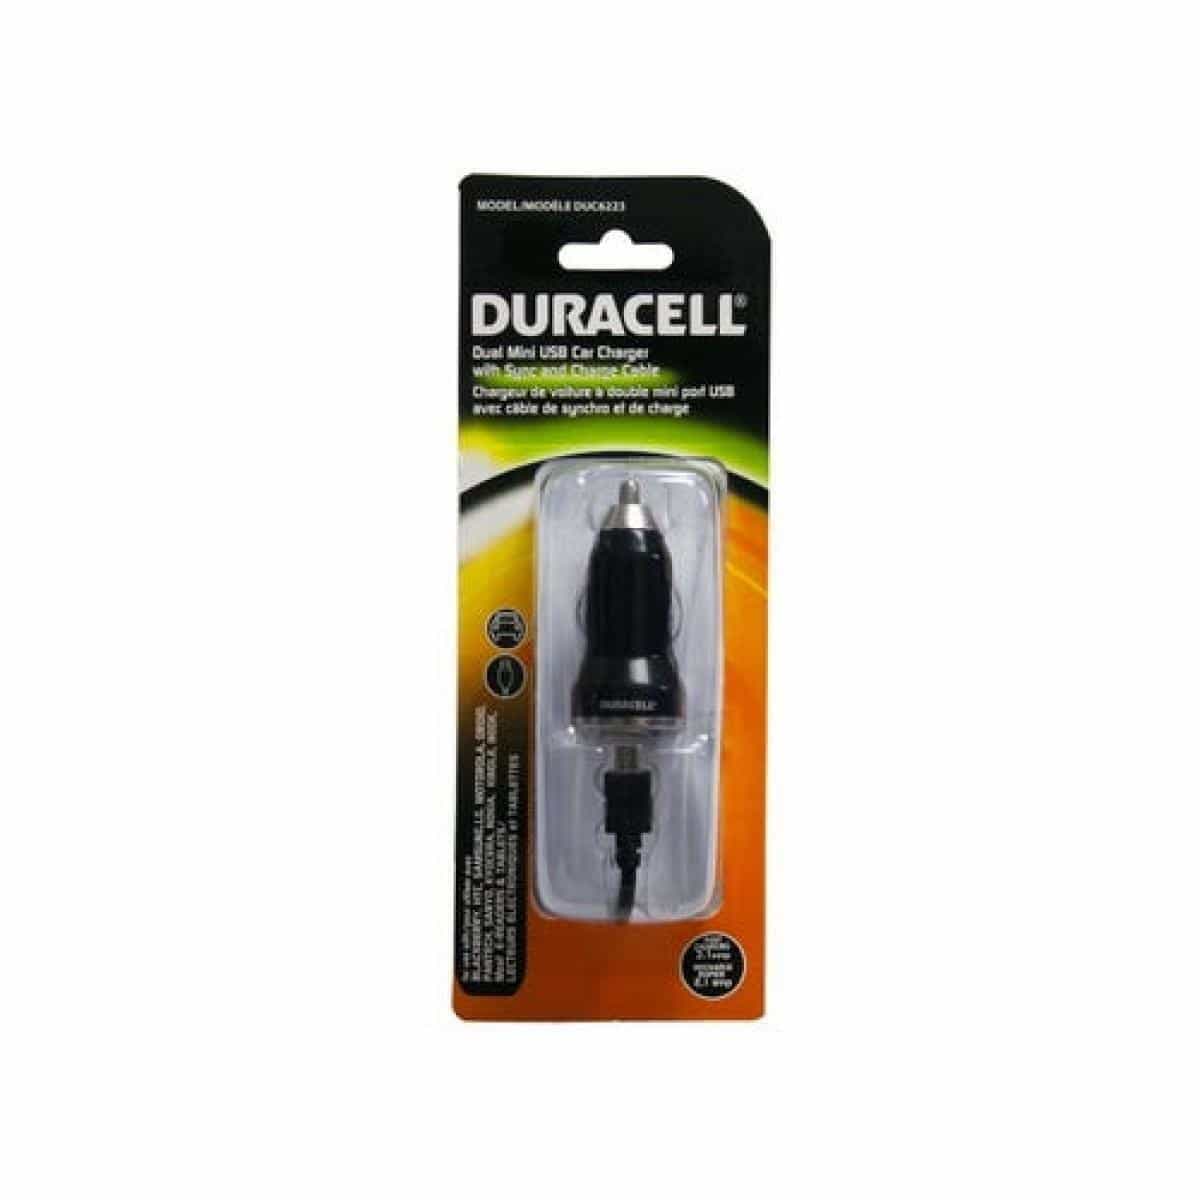 Duracell 2.1 Amp Dual USB Car Charger with Micro USB Cord